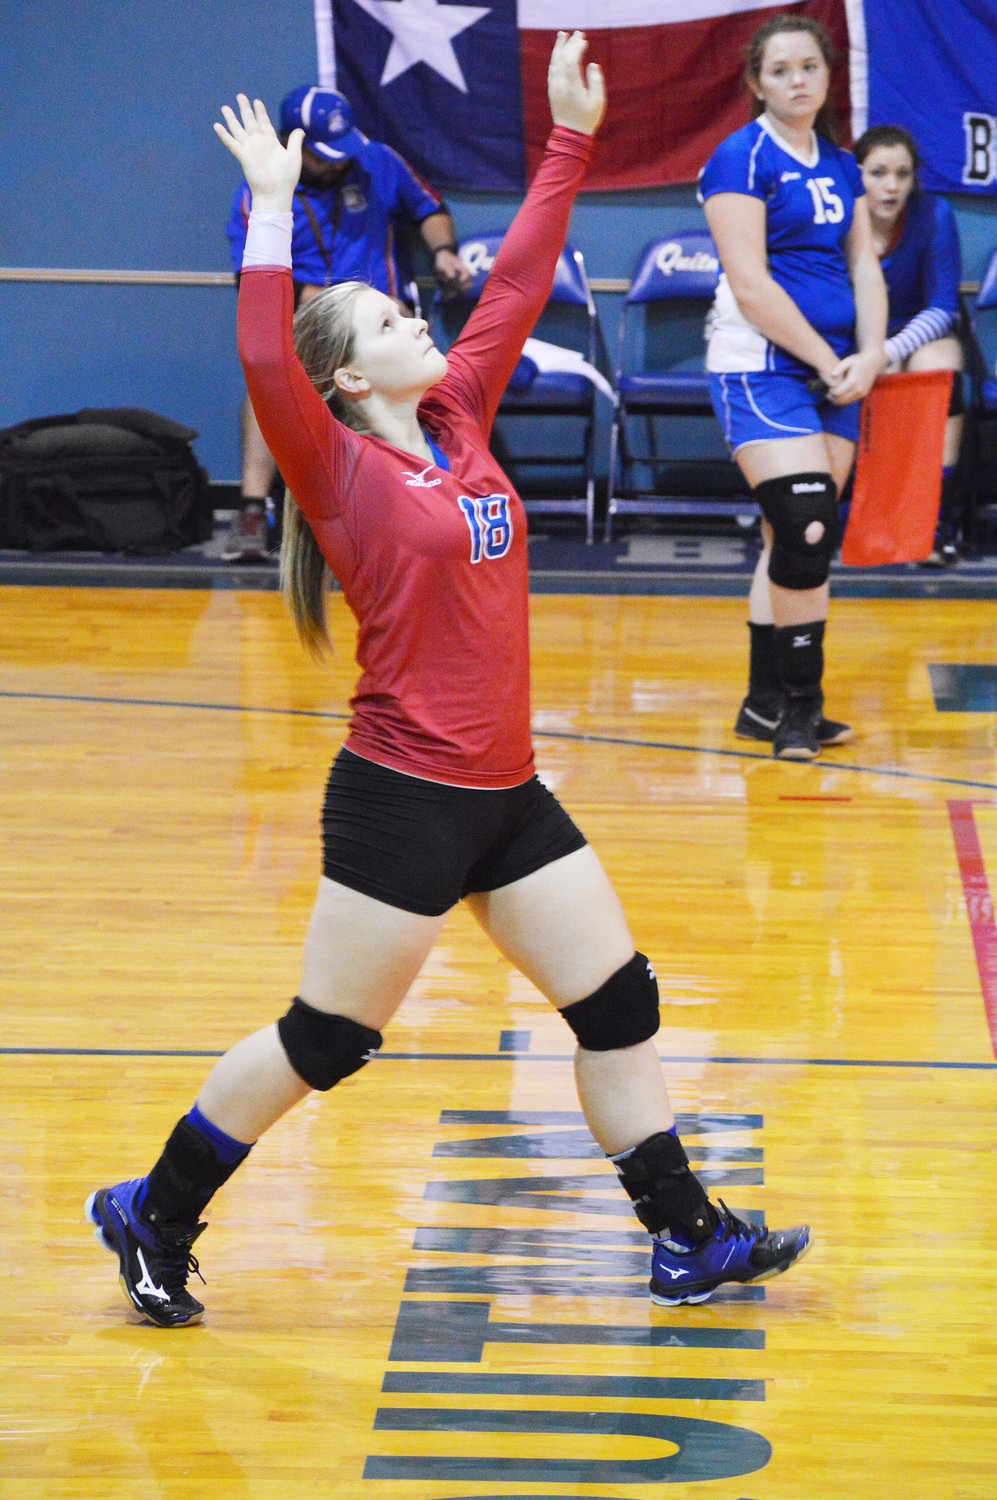 Abby Dobbs serves during Quitman’s district win over Scurry-Rosser Friday. (Monitor photo by Larry Tucker)